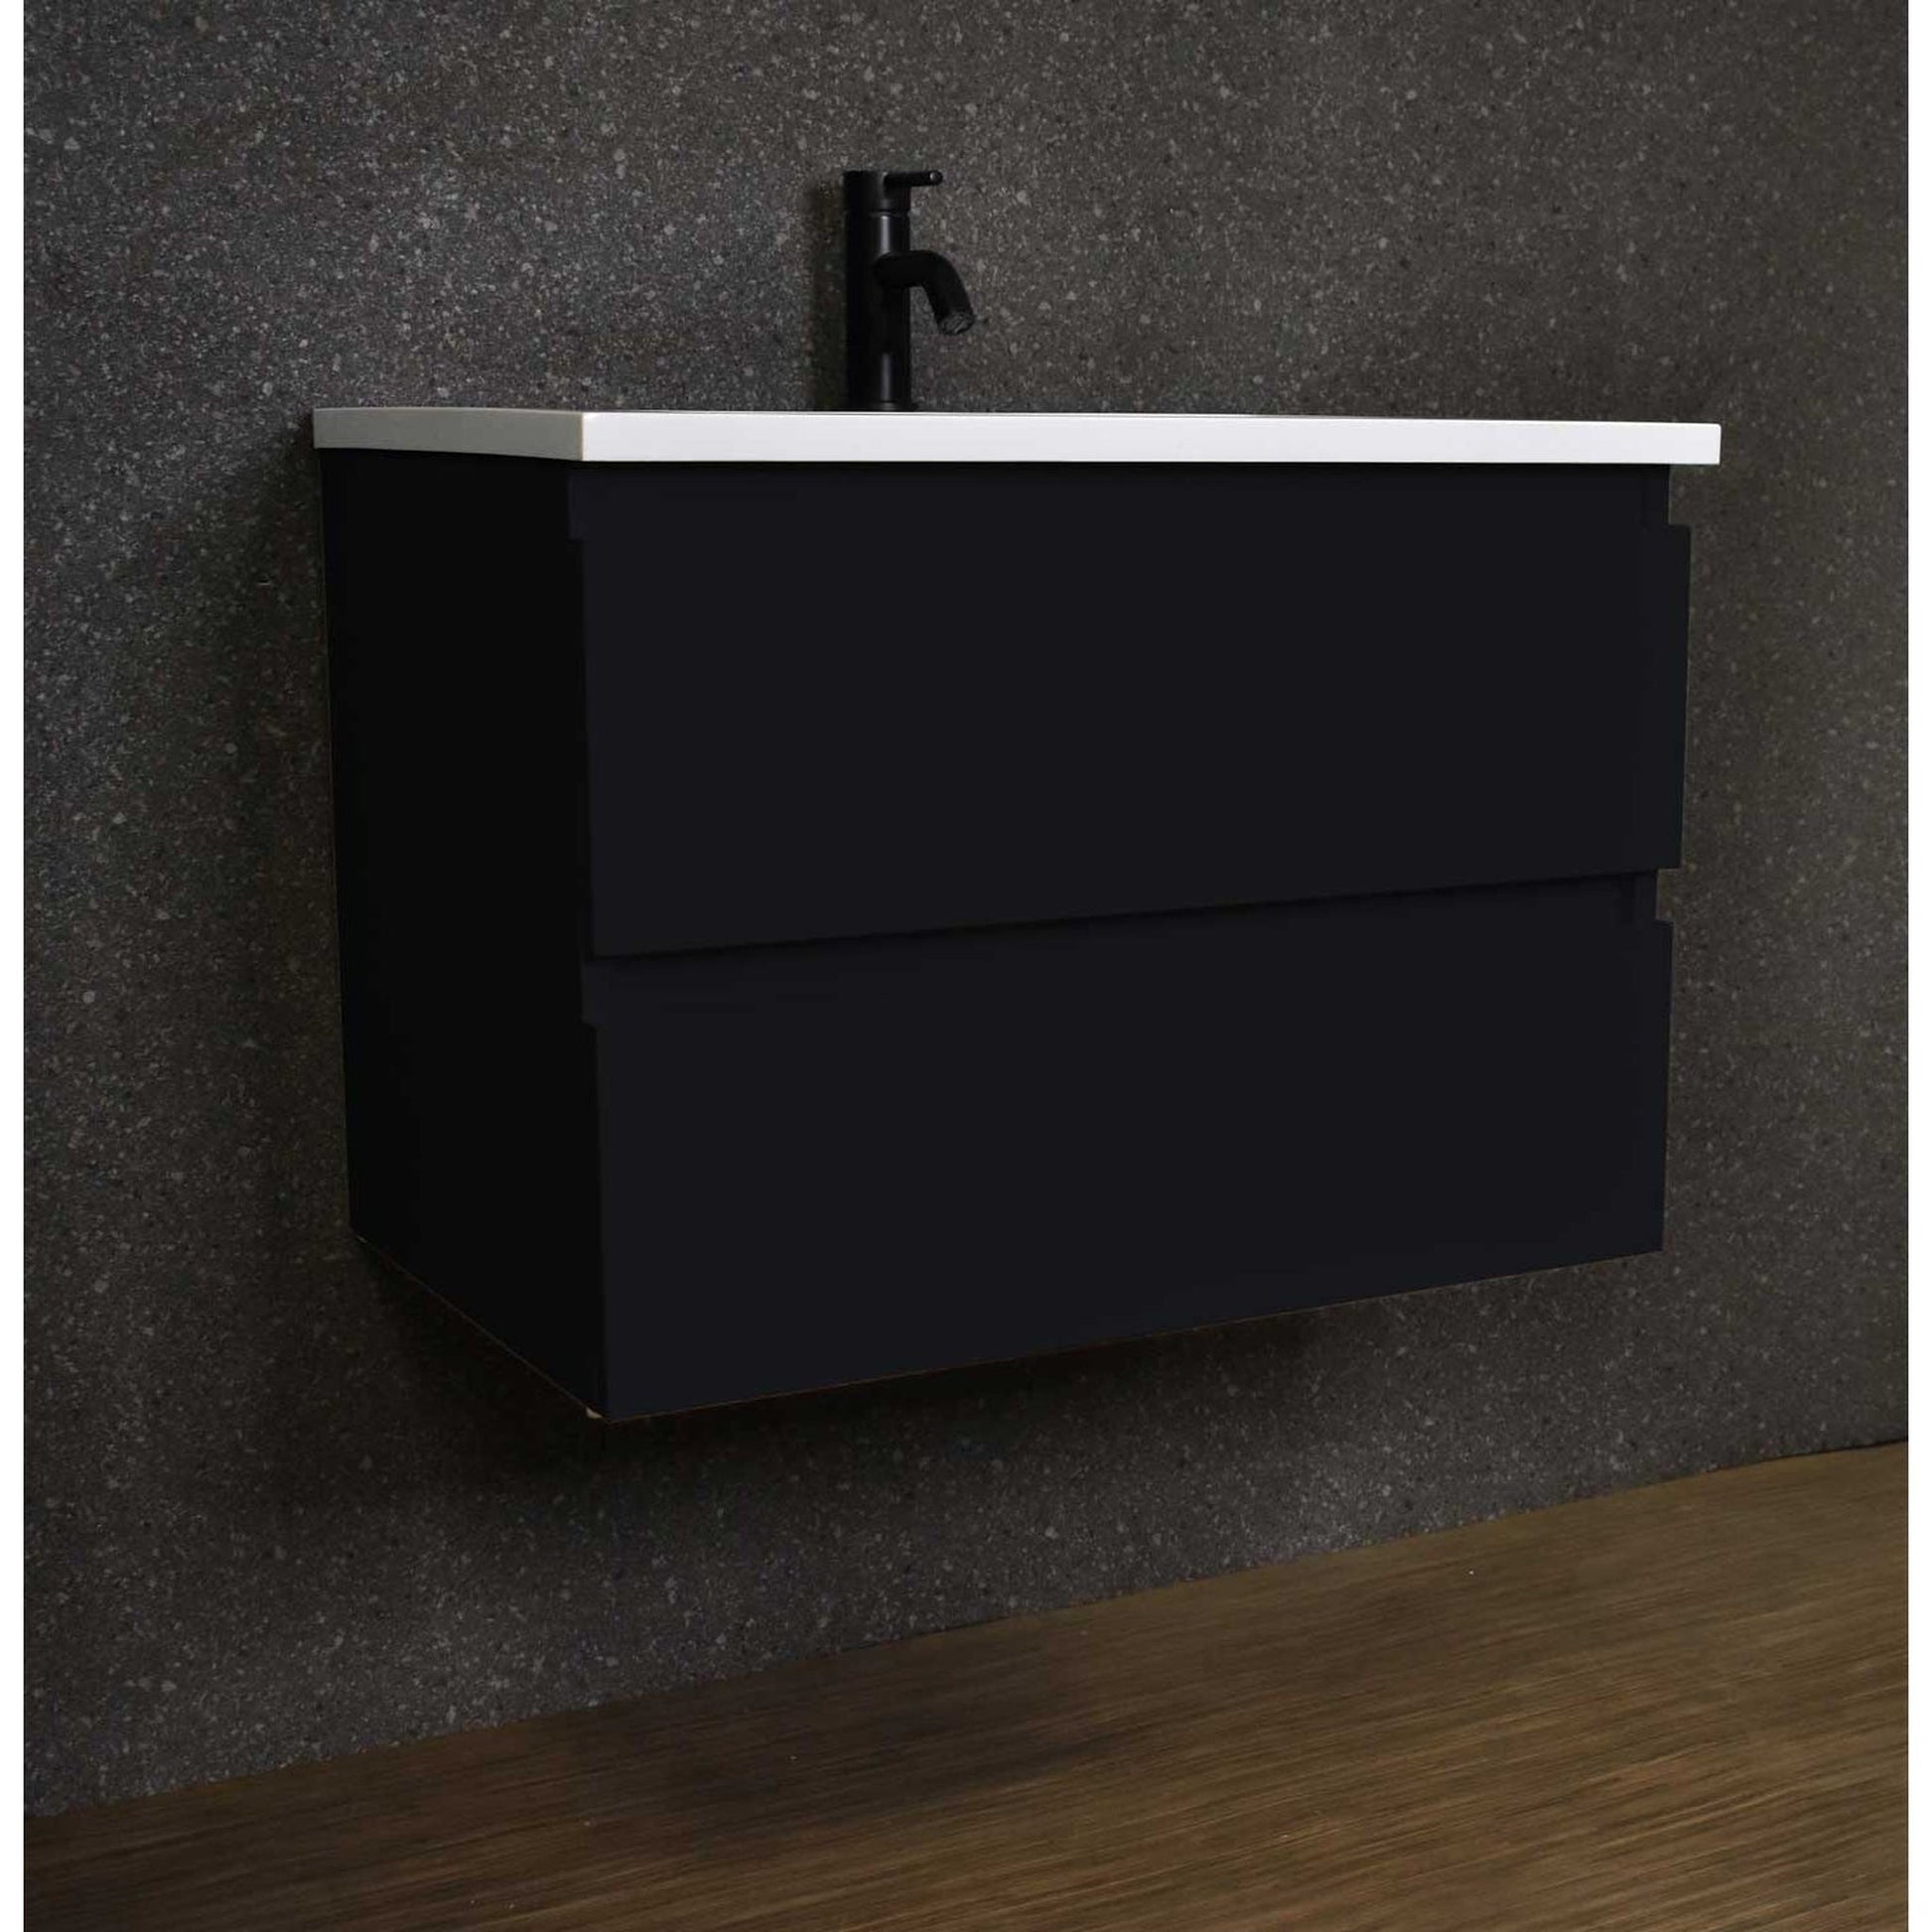 Volpa USA Salt 24" x 20" Black Wall-Mounted Floating Bathroom Vanity With Drawers, Acrylic Top and Integrated Acrylic Sink